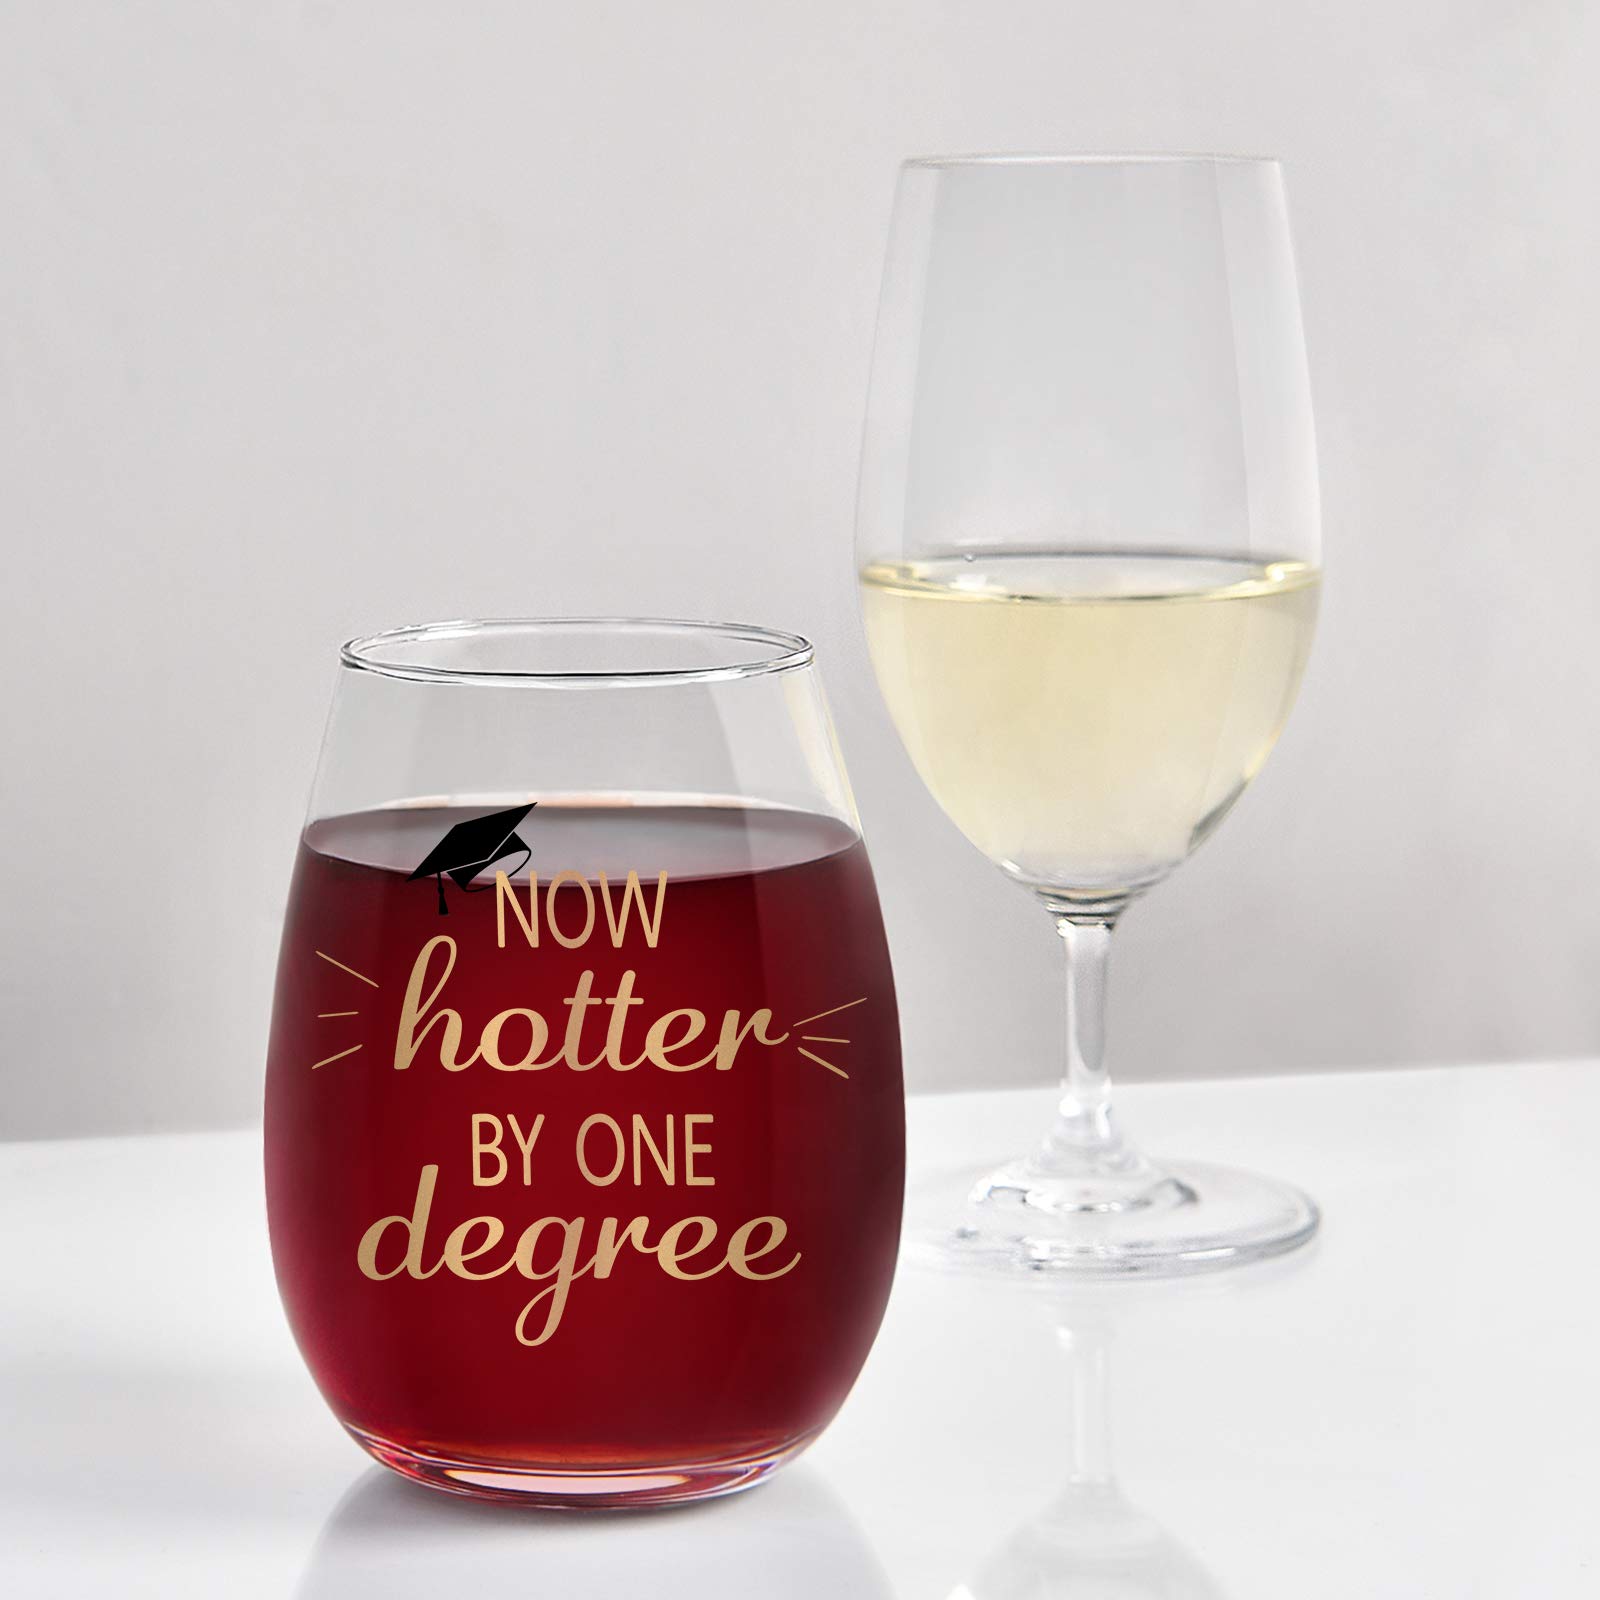 Now Hotter by One Degree Wine Glass, Graduation Stemless Wine Glass 15Oz - Graduation Gift for Him, Her, College Graduates, High School Graduates